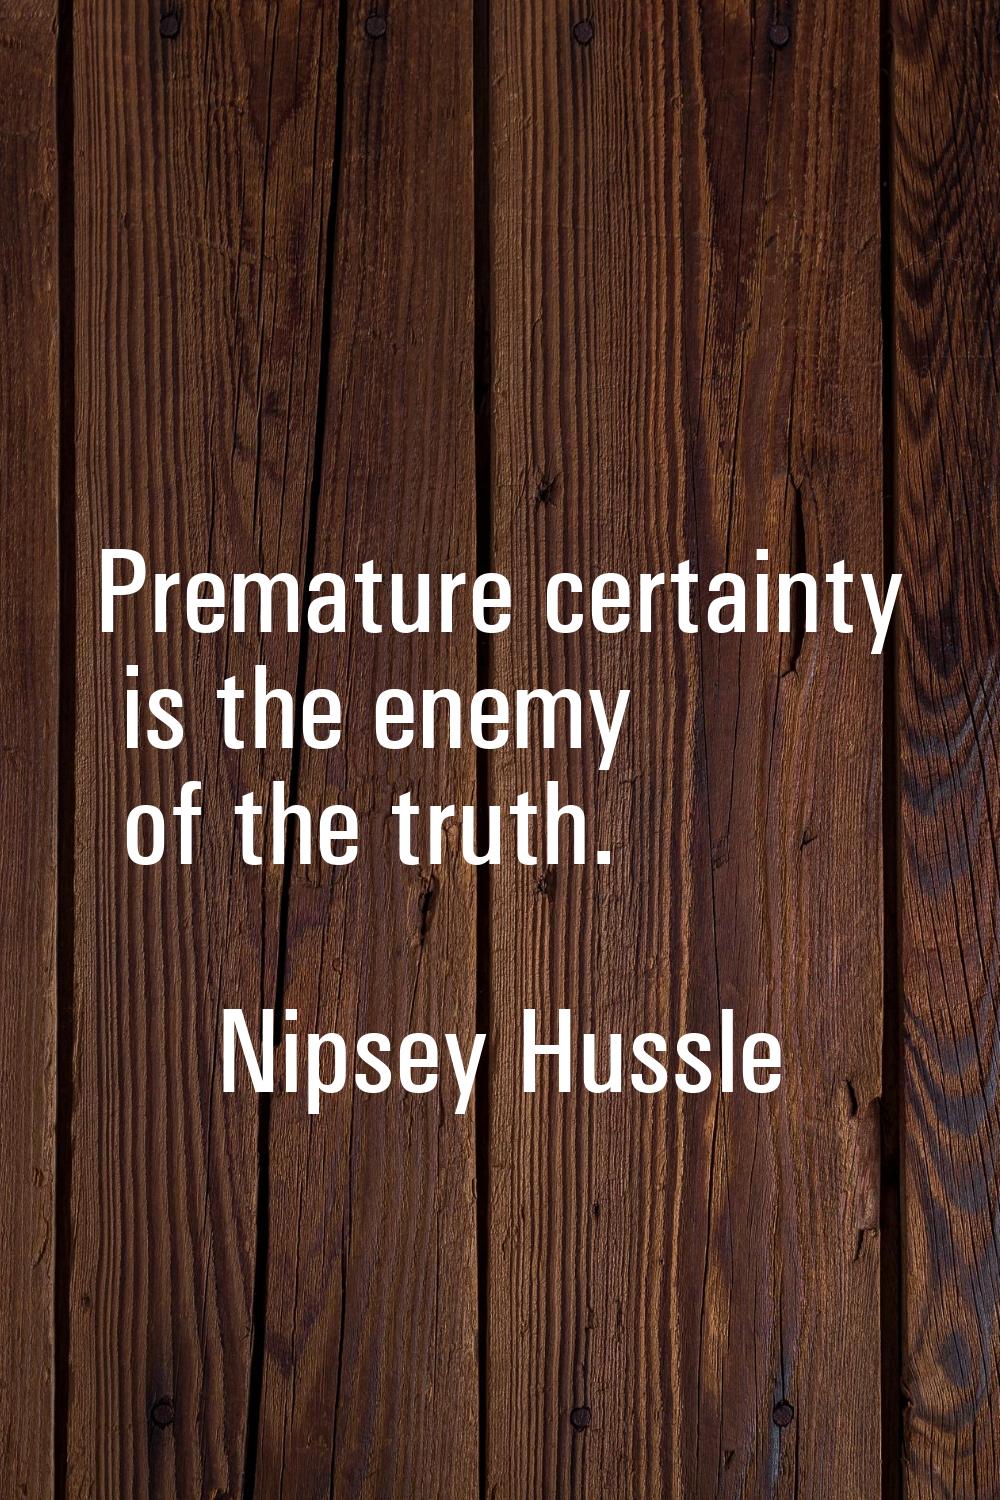 Premature certainty is the enemy of the truth.